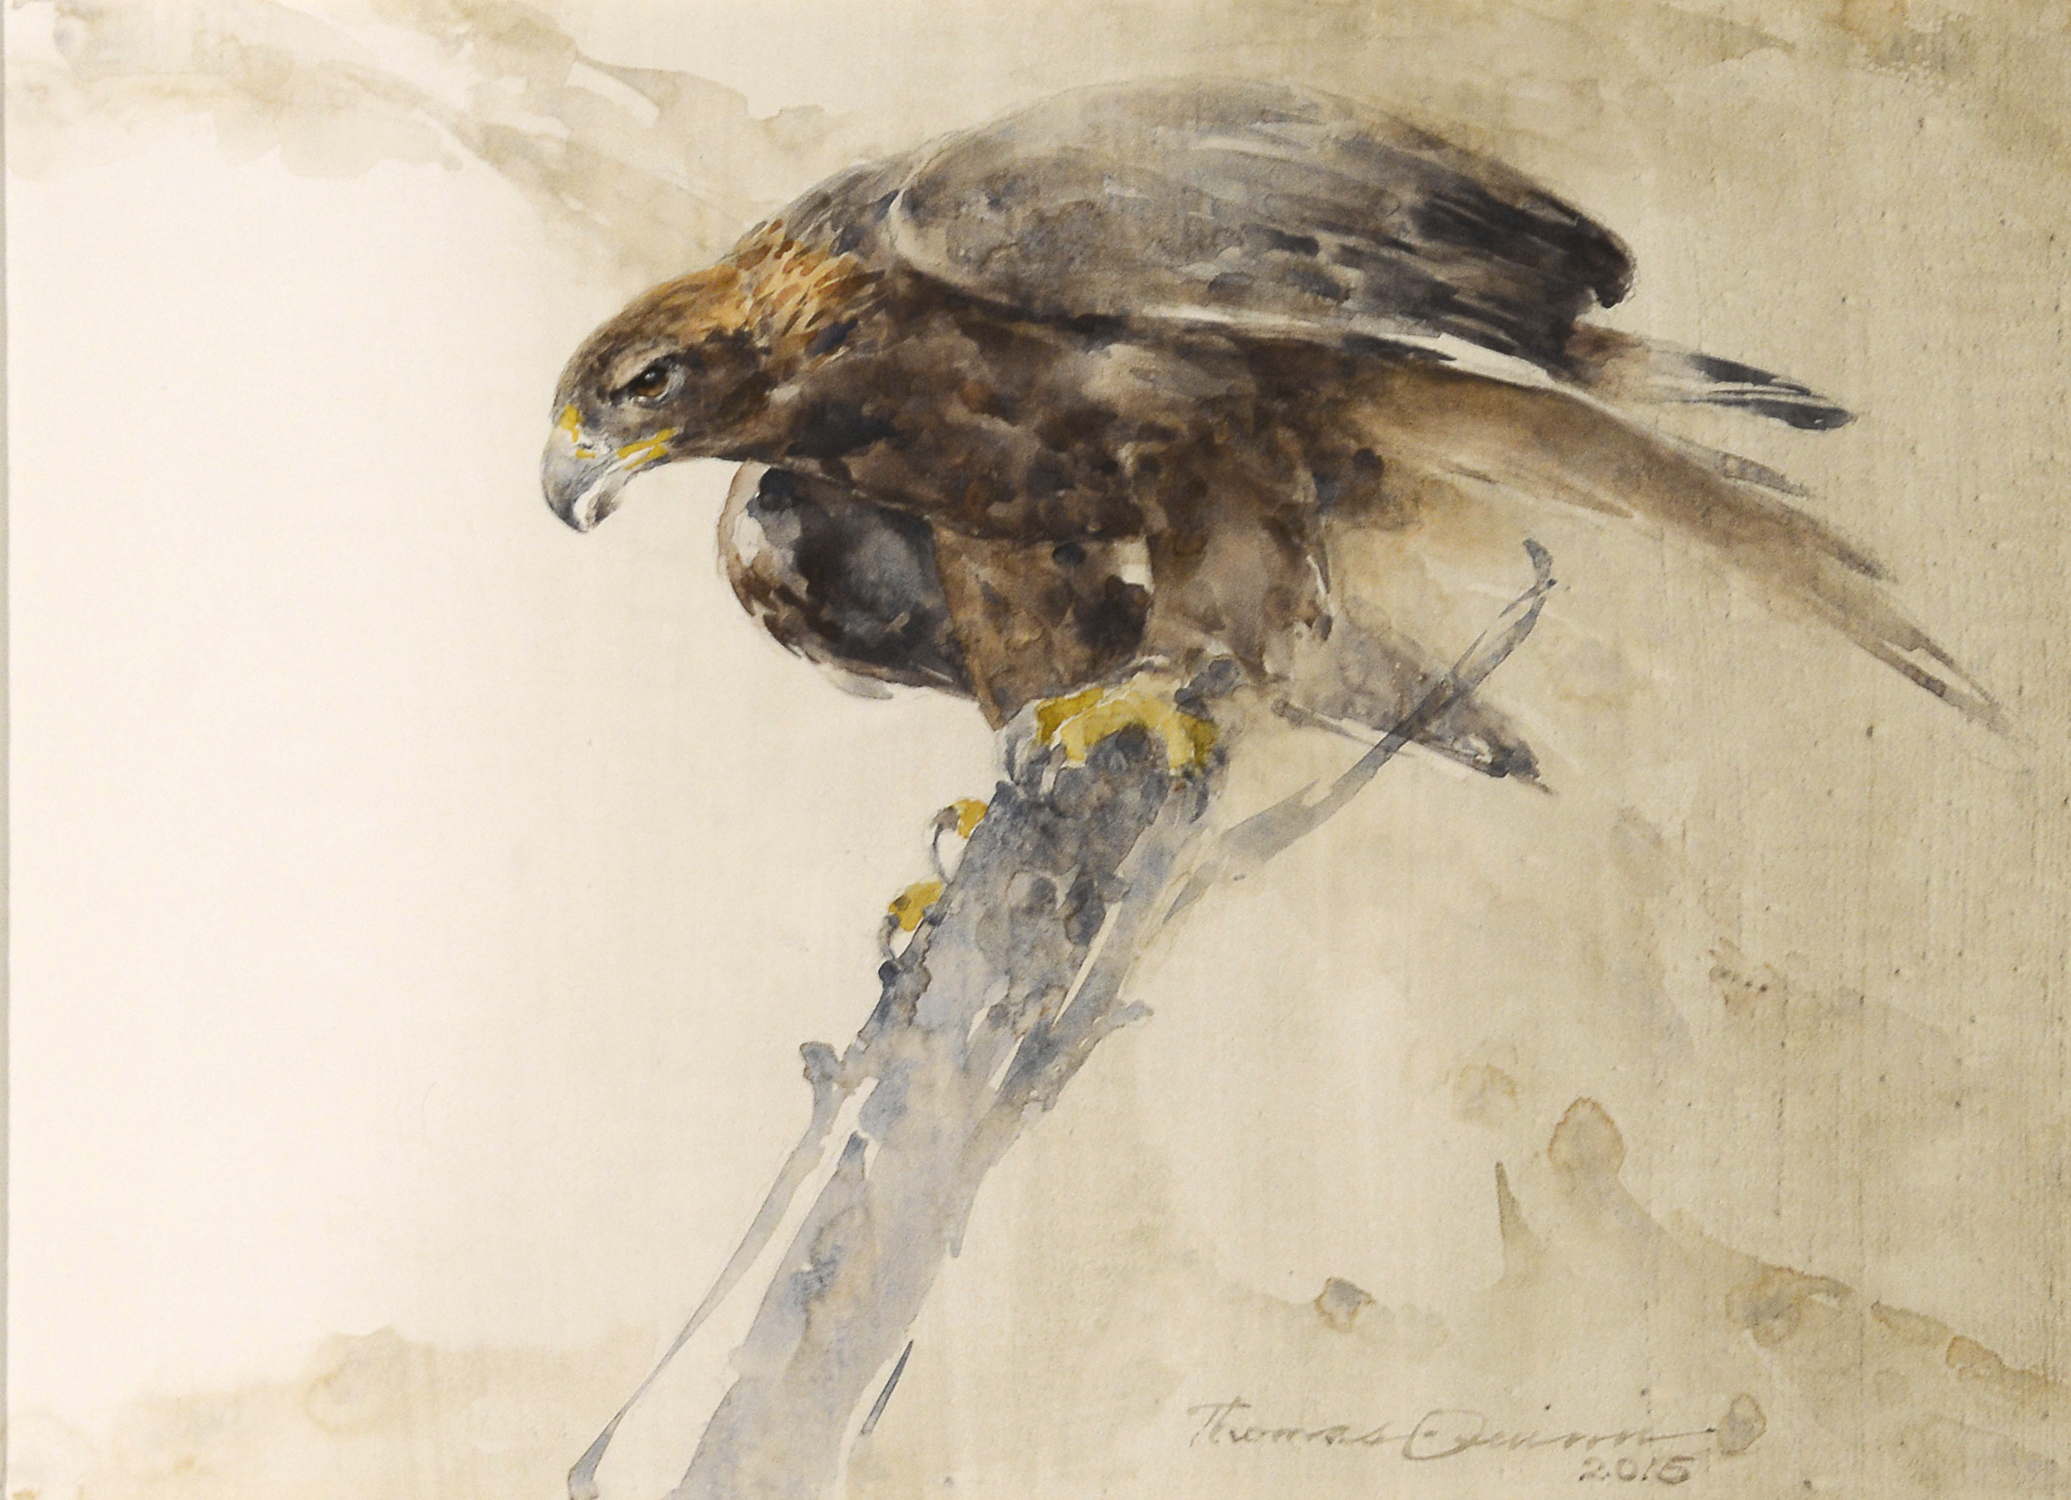 

											Tony Angell, Thomas Quinn</b>

											<em>
												Tony Angell and Thomas Quinn:  A Conversation with Nature</em> 

											<h4>
												September 25 - November 28, 2020											</h4>

		                																																<i>Rogue River Queen,</i>  
																																																					watercolor on paper, 
																																								 11 3/4 x 16 3/8 inches 
																								
		                				